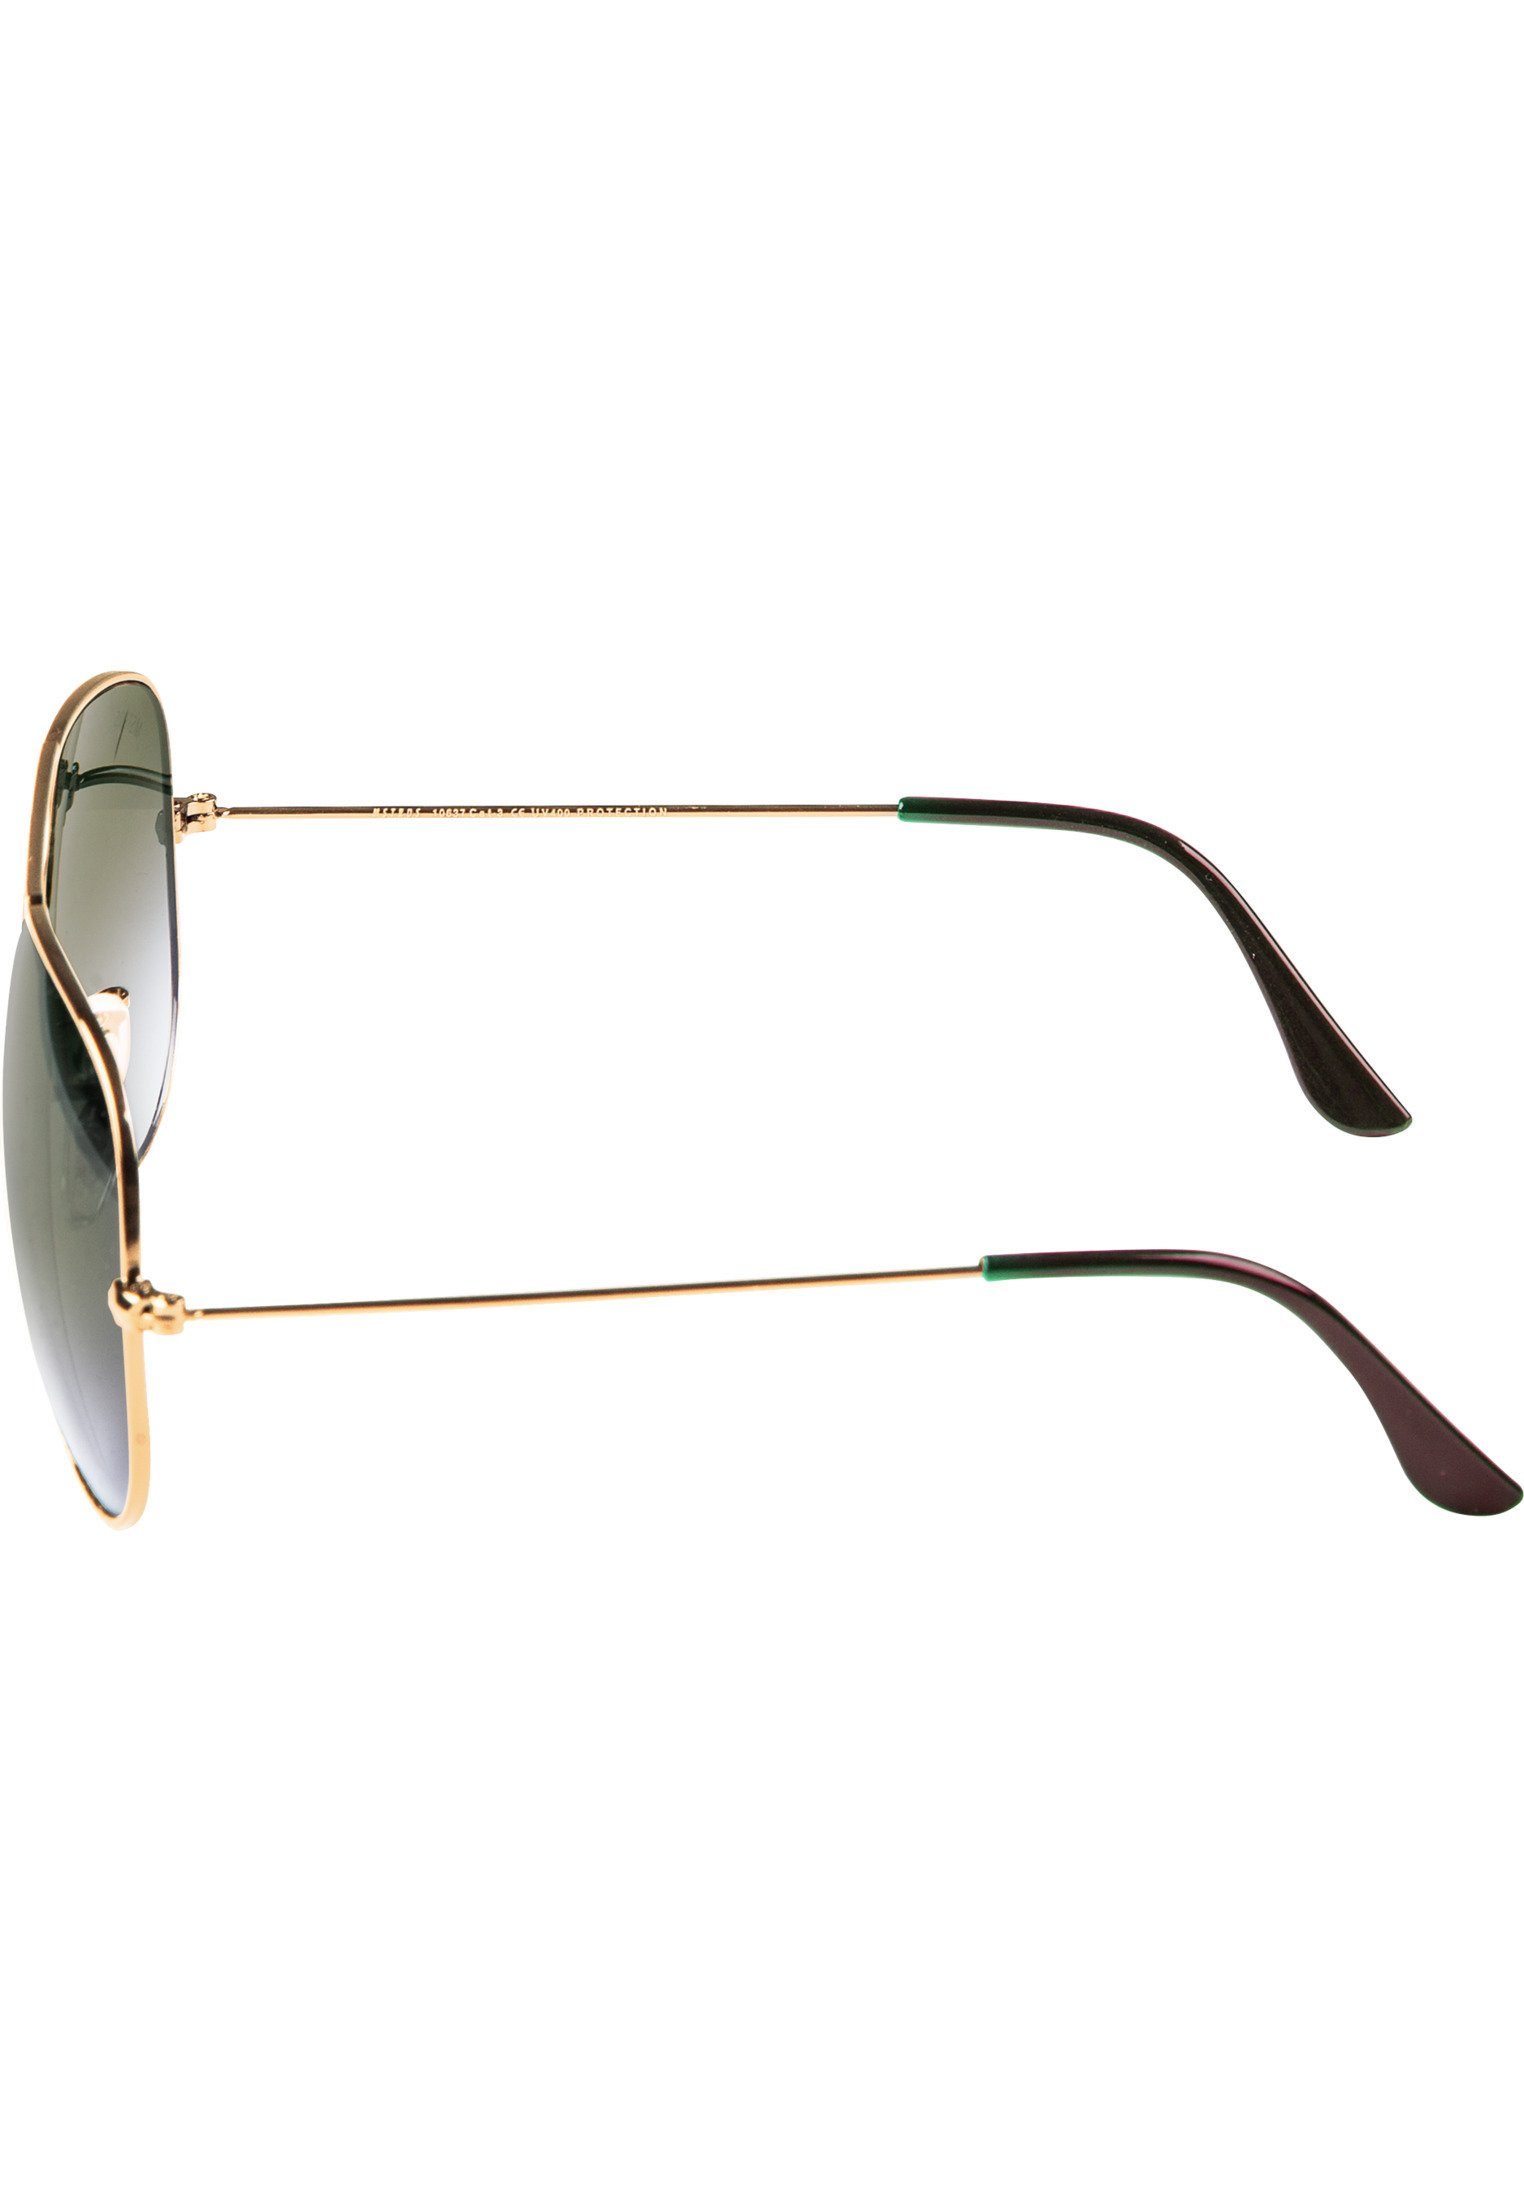 Accessoires Sonnenbrille gold/brown PureAv Sunglasses MSTRDS Youth